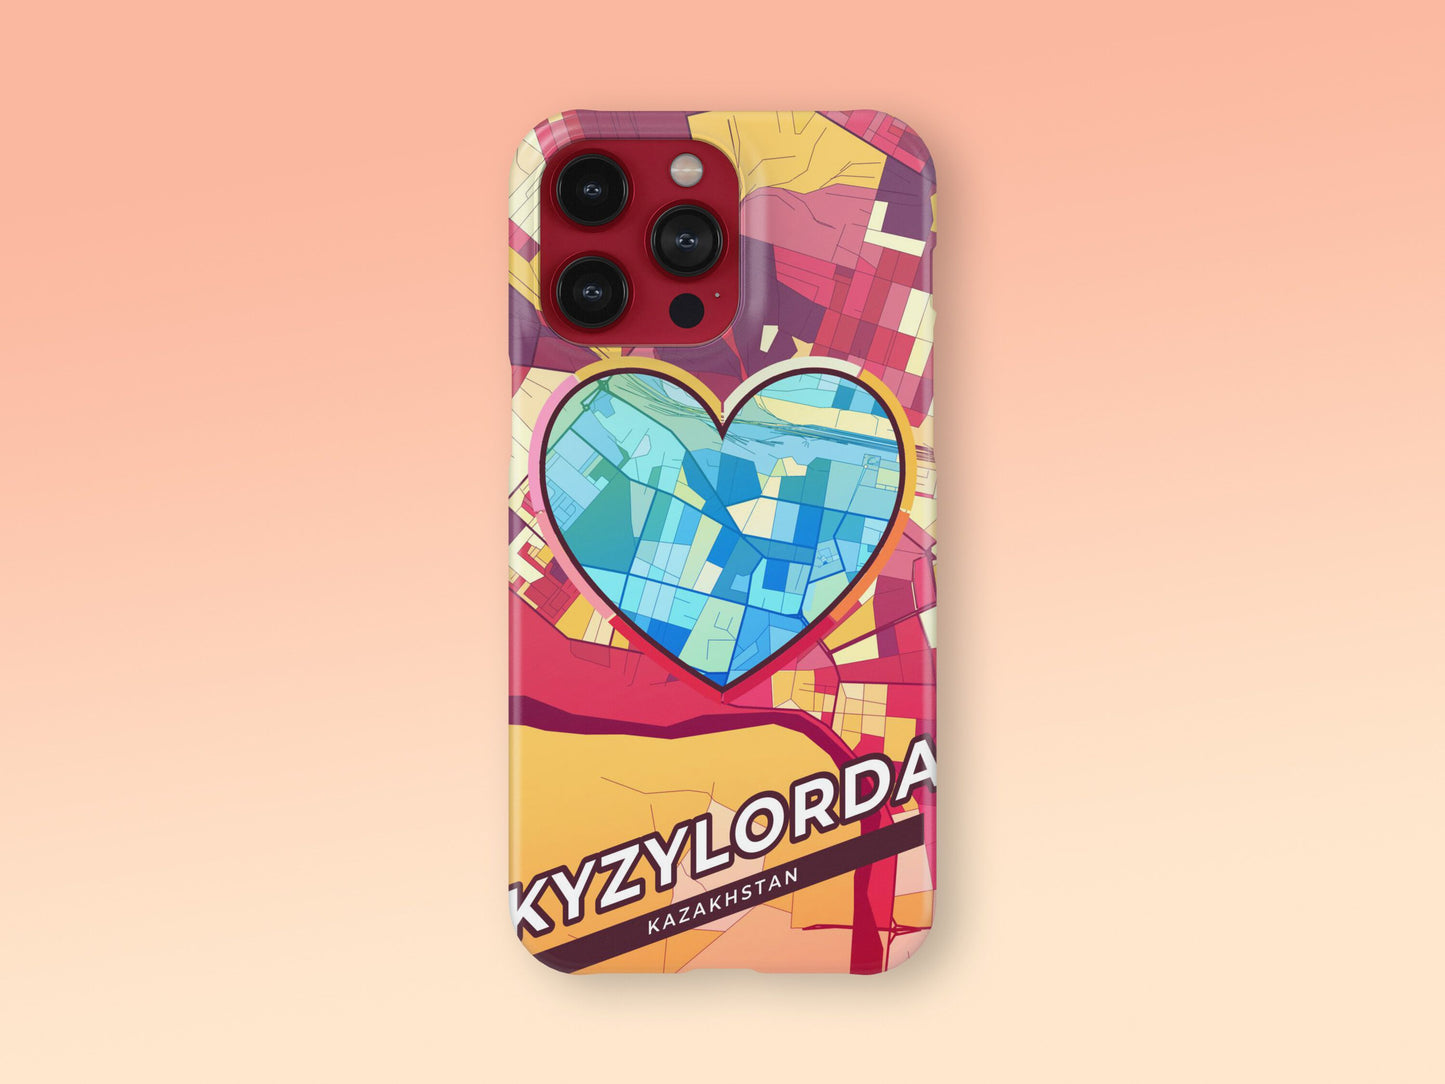 Kyzylorda Kazakhstan slim phone case with colorful icon. Birthday, wedding or housewarming gift. Couple match cases. 2